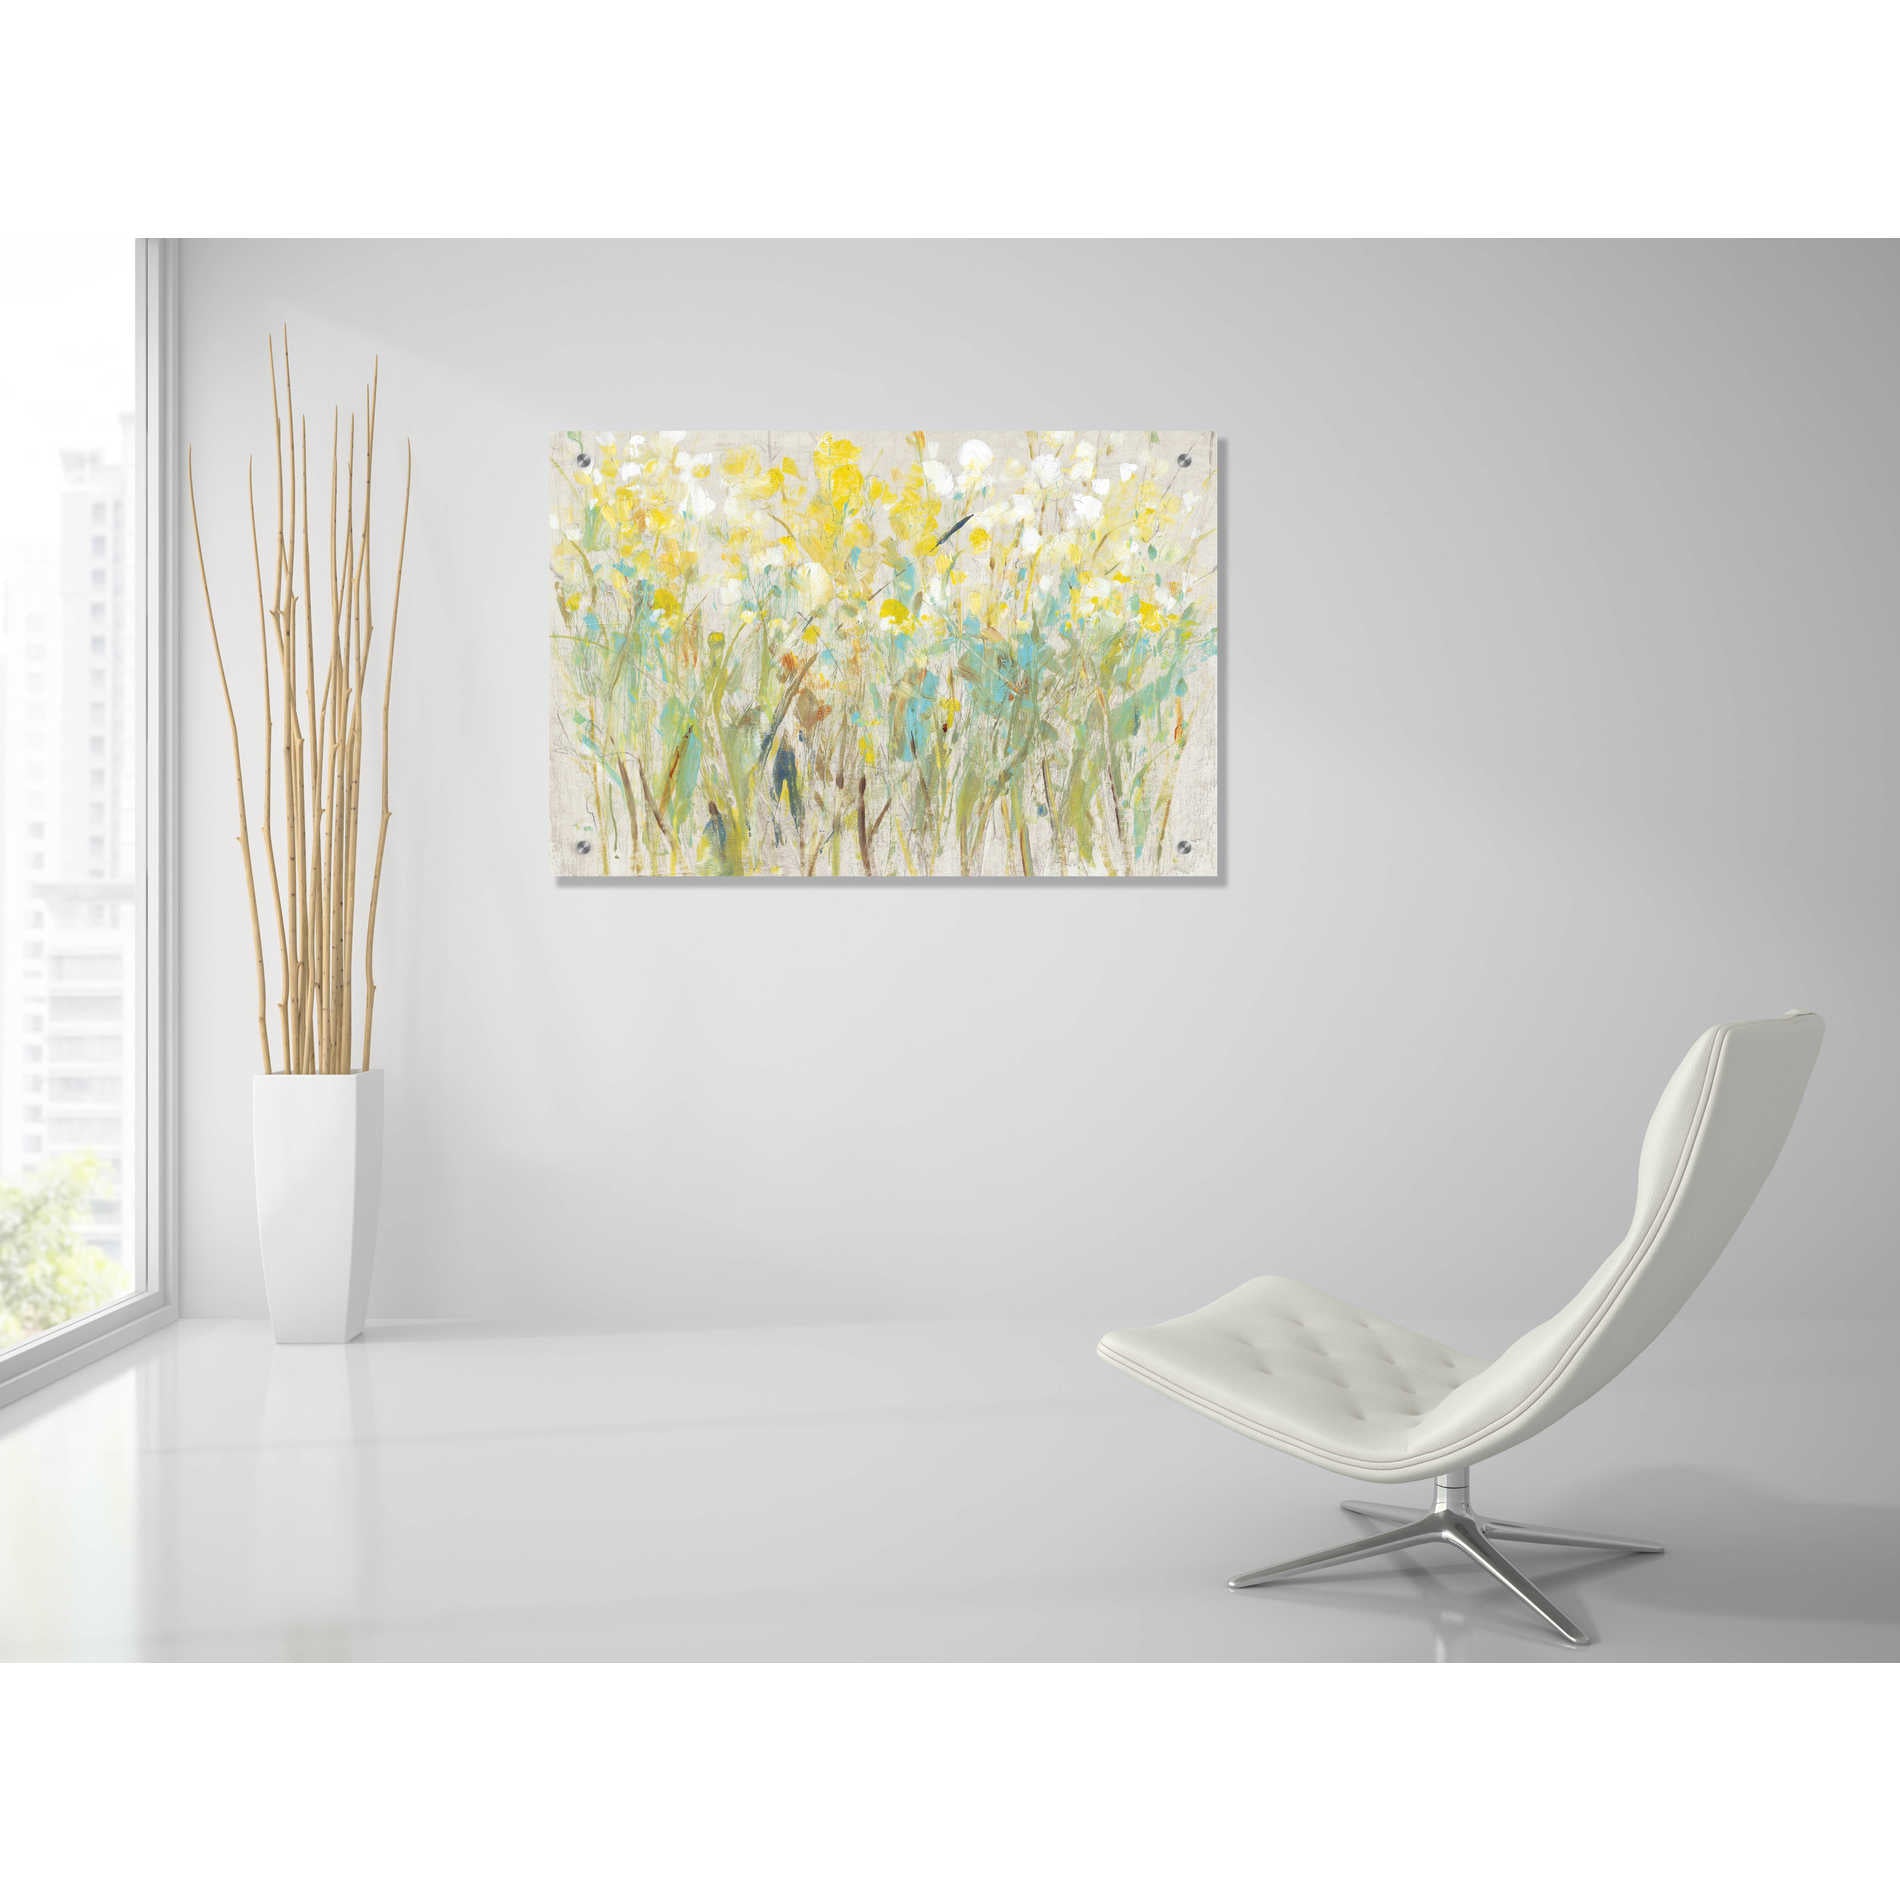 Epic Art 'Floral Cluster I' by Tim O'Toole, Acrylic Glass Wall Art,36x24